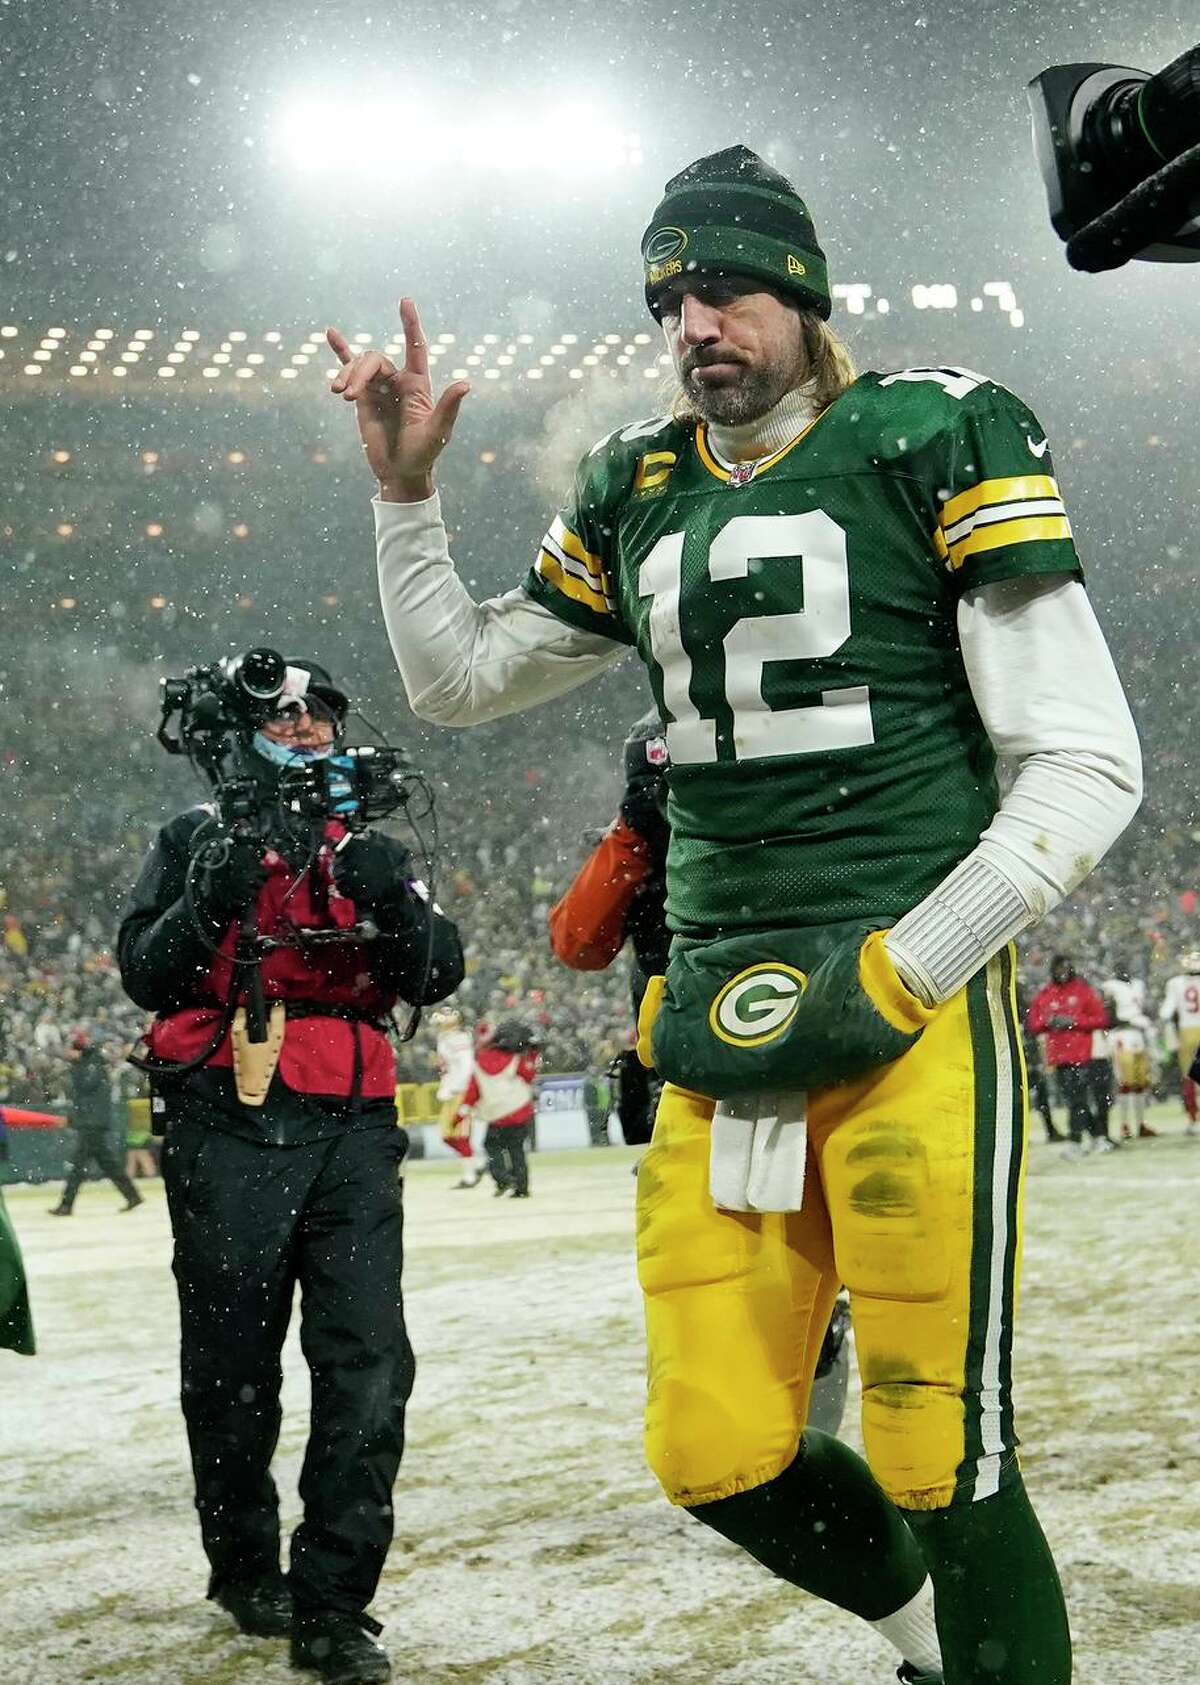 Quarterback Aaron Rodgers departs after the Packers lost their divisional playoff game to the 49ers at Lambeau Field.